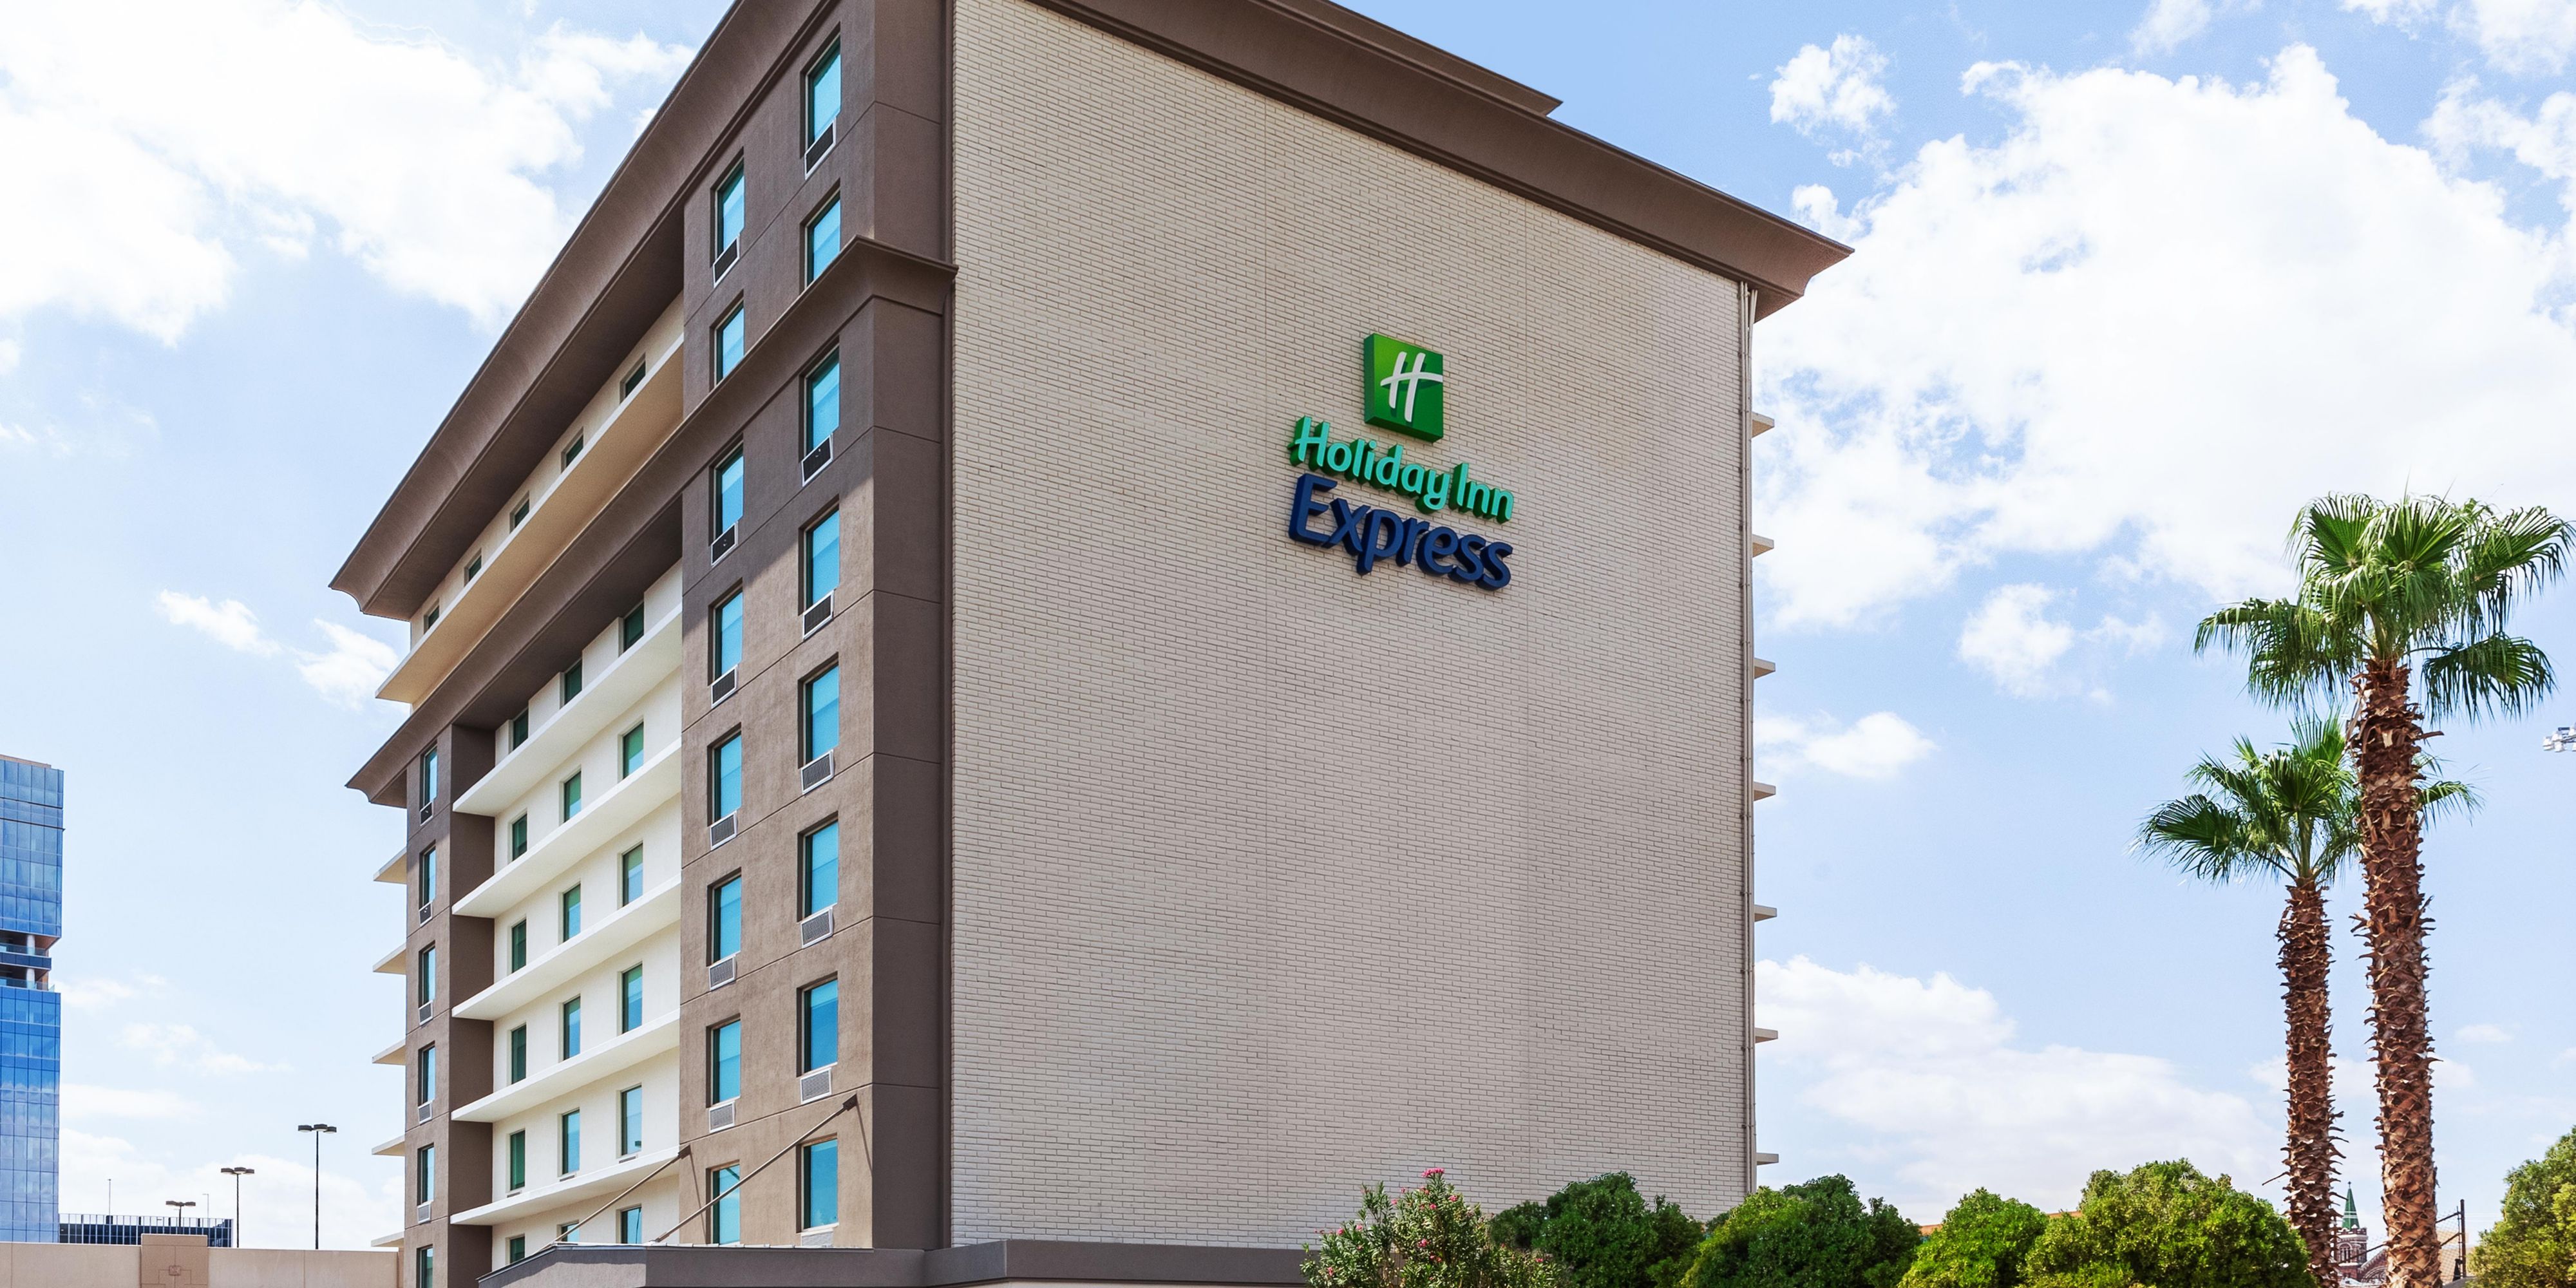 We value you and reward you with complimentary vehicle parking. We're the only hotel in downtown El Paso that offer free parking for hotel guests.